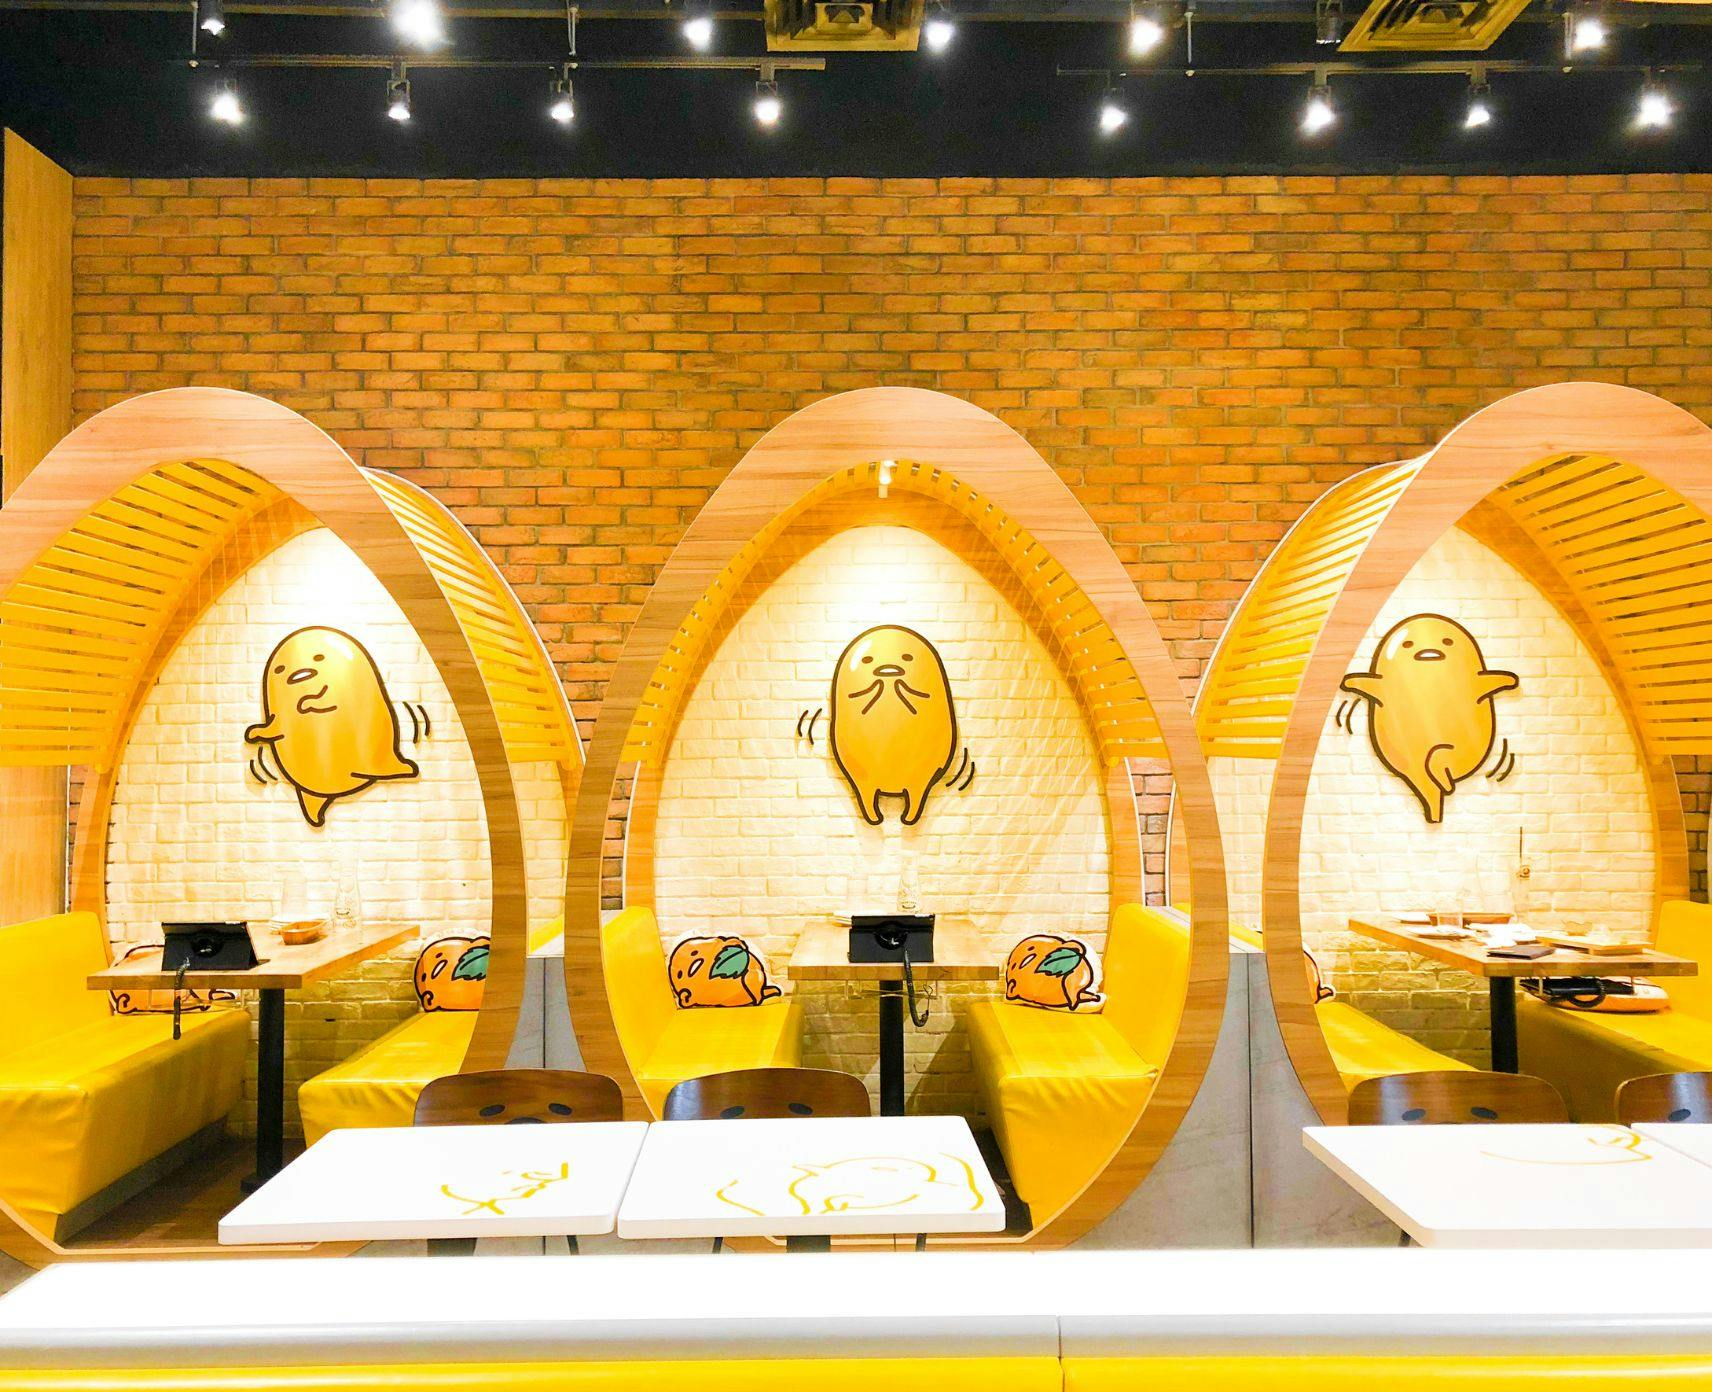 Gudetama cafe in Singapore. The booths have egg-shaped arches which all feature an illustration of Gudetama in a different pose.